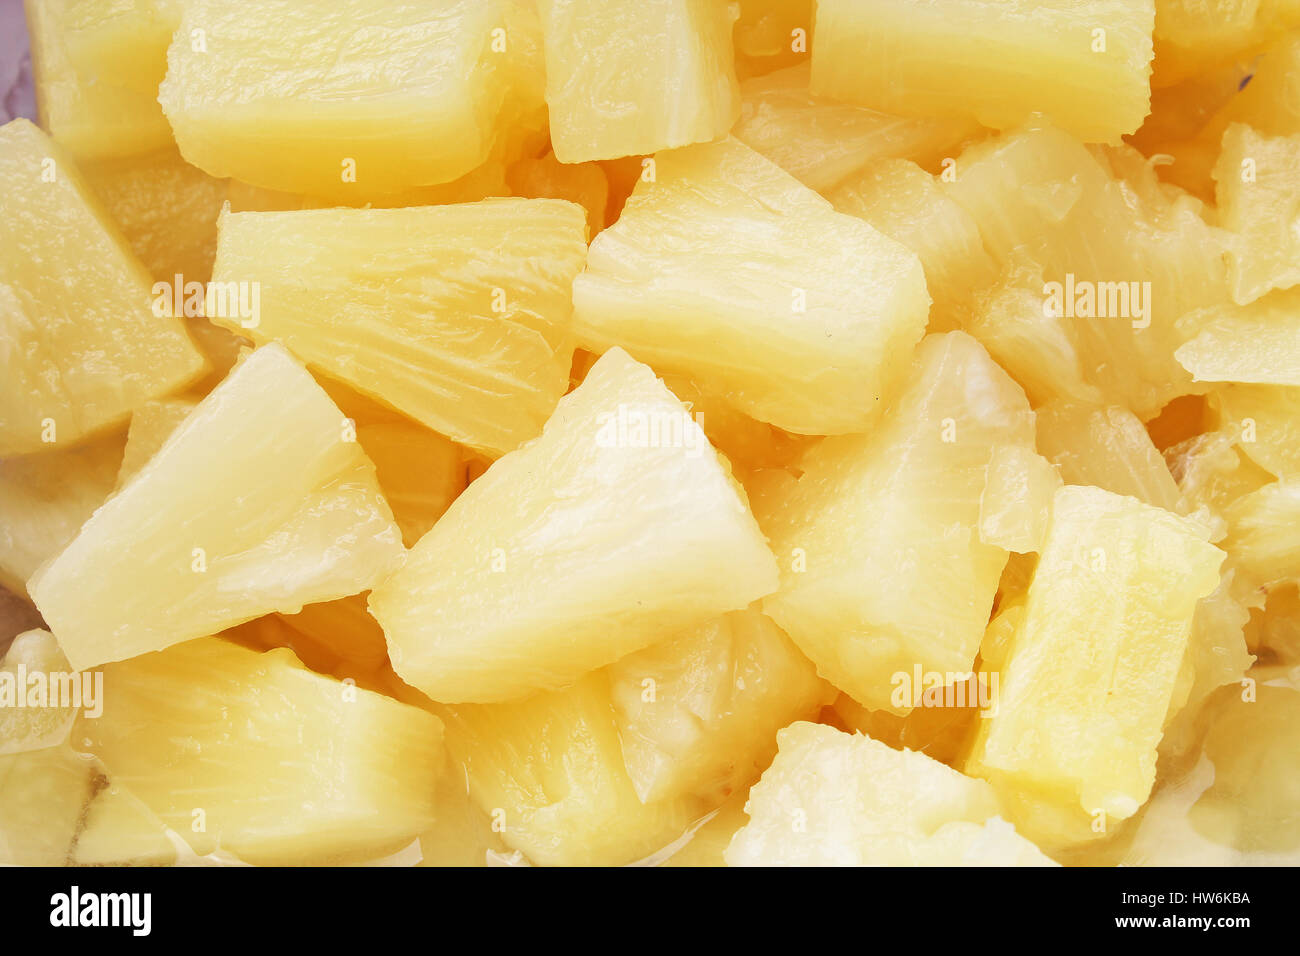 Pineapple slices as background. Stock Photo